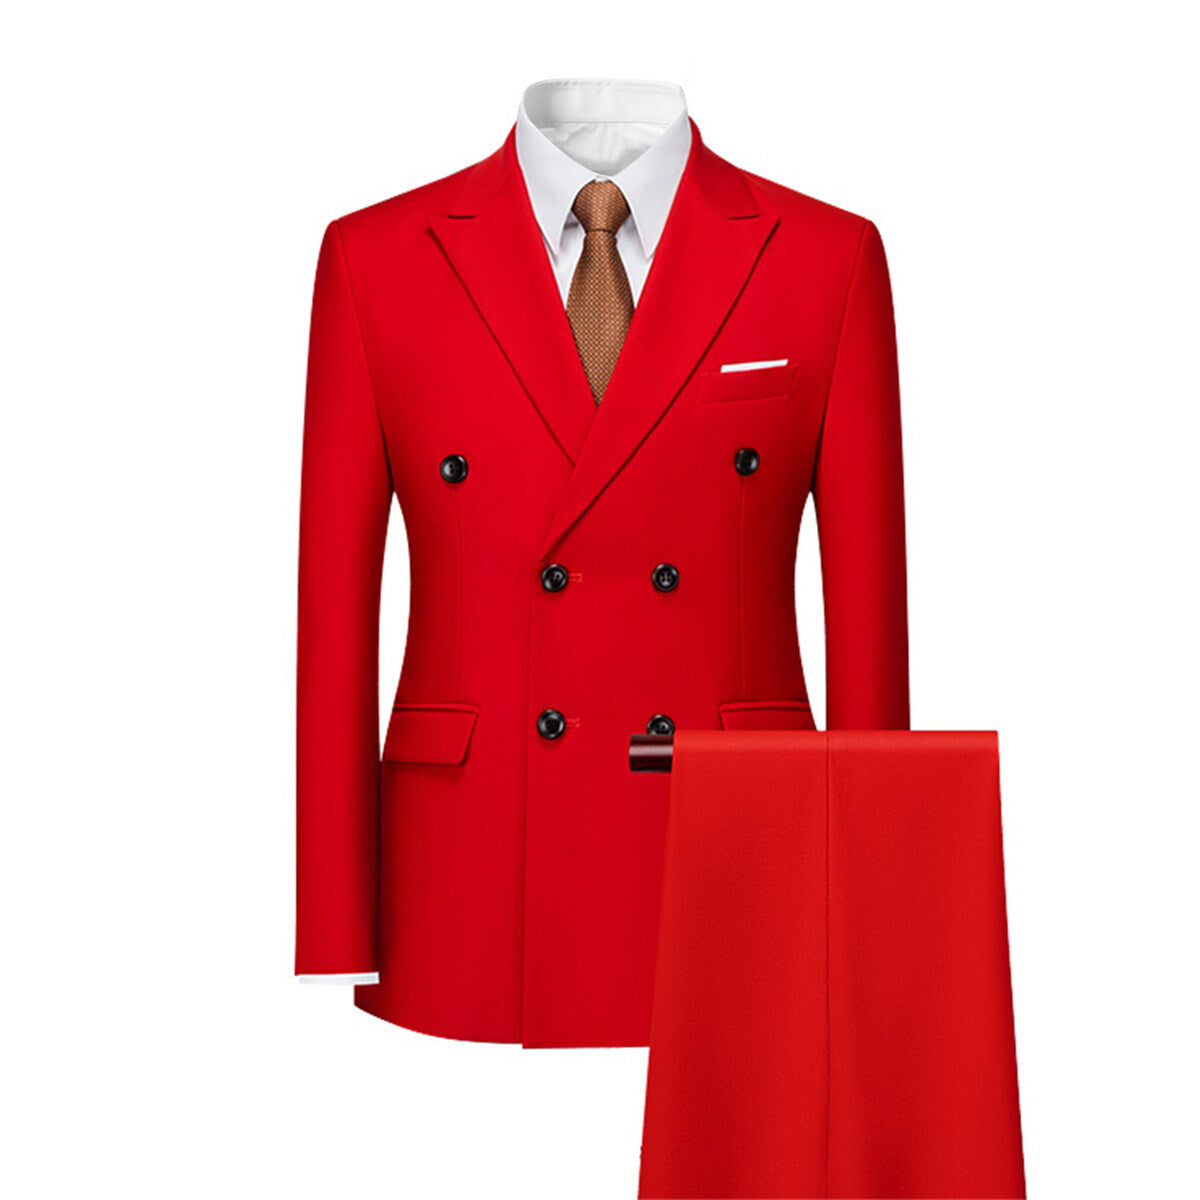 Men's Solid Color Double Breasted Business Suit Red